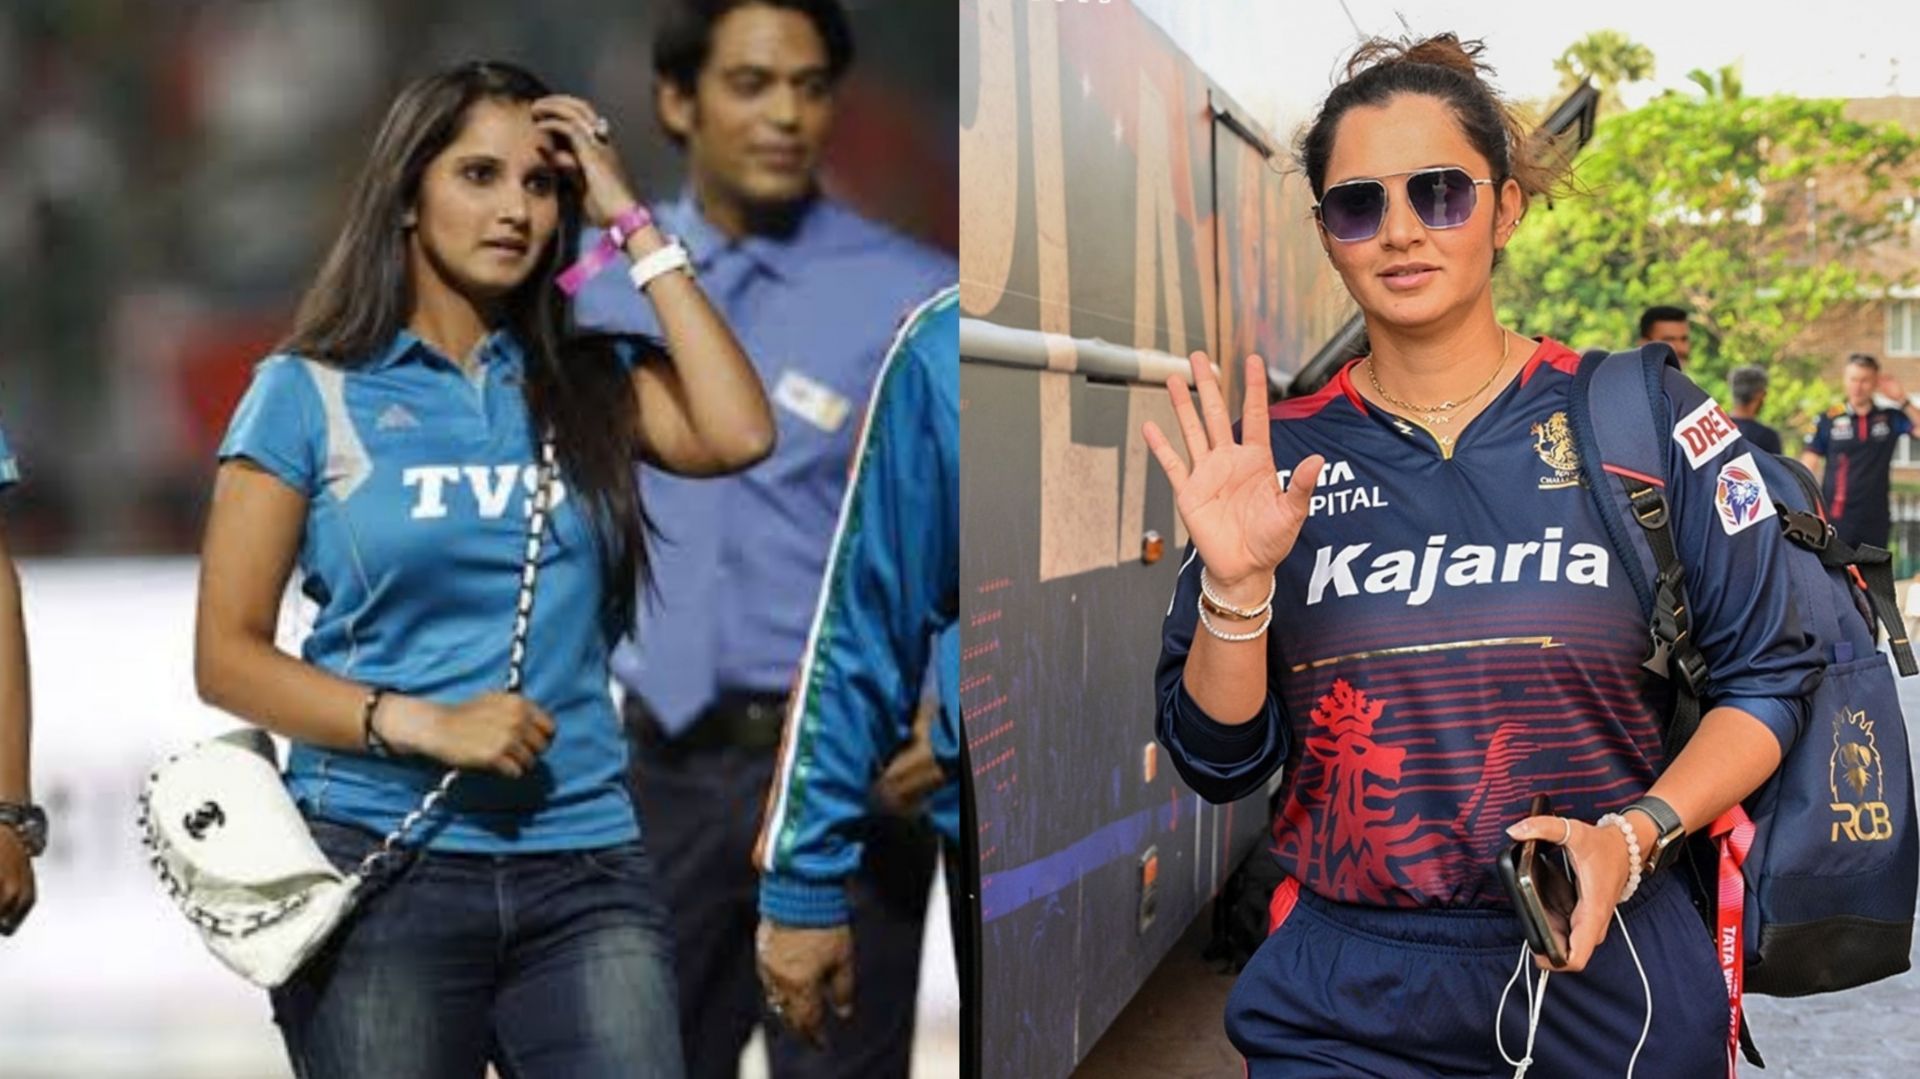 Sania Mirza has been a fan of multiple IPL teams 